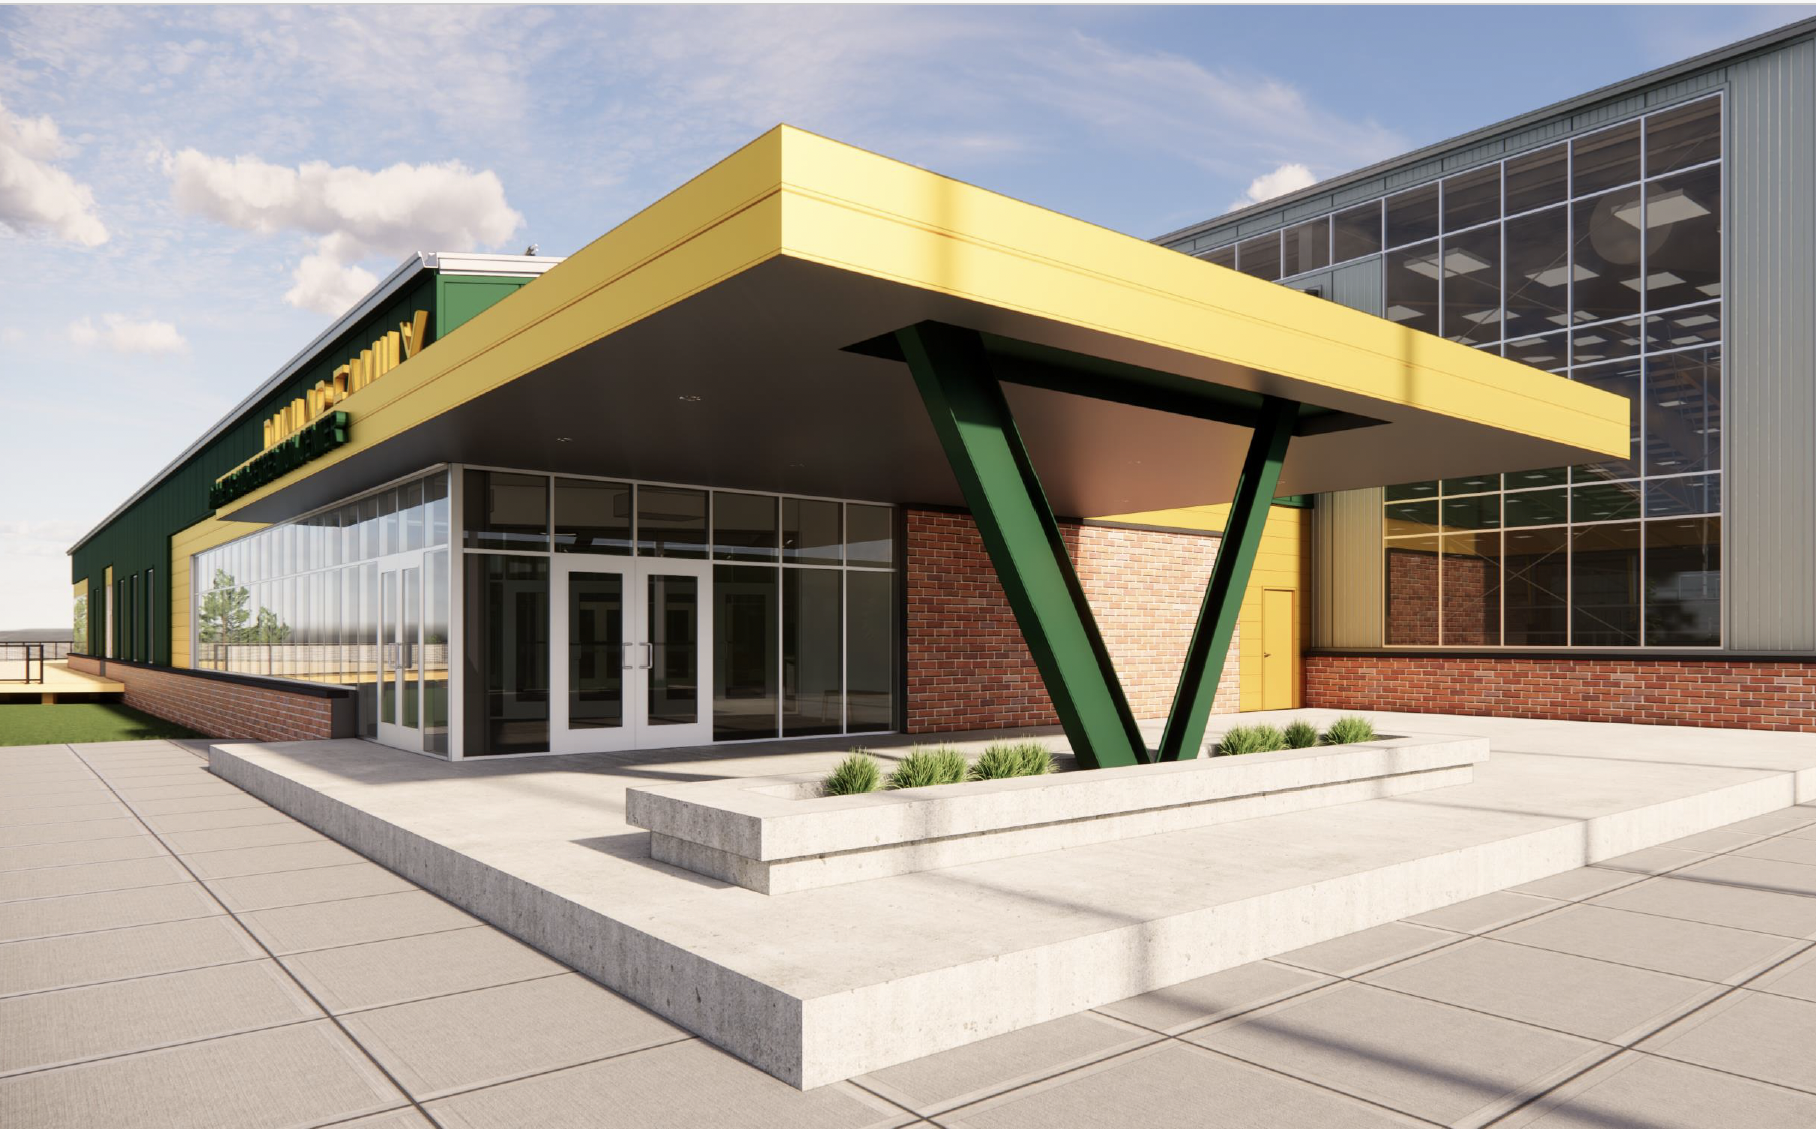 The entrance to the new Dunlap Family Athletic and Recreation Center, scheduled to open in November 2025